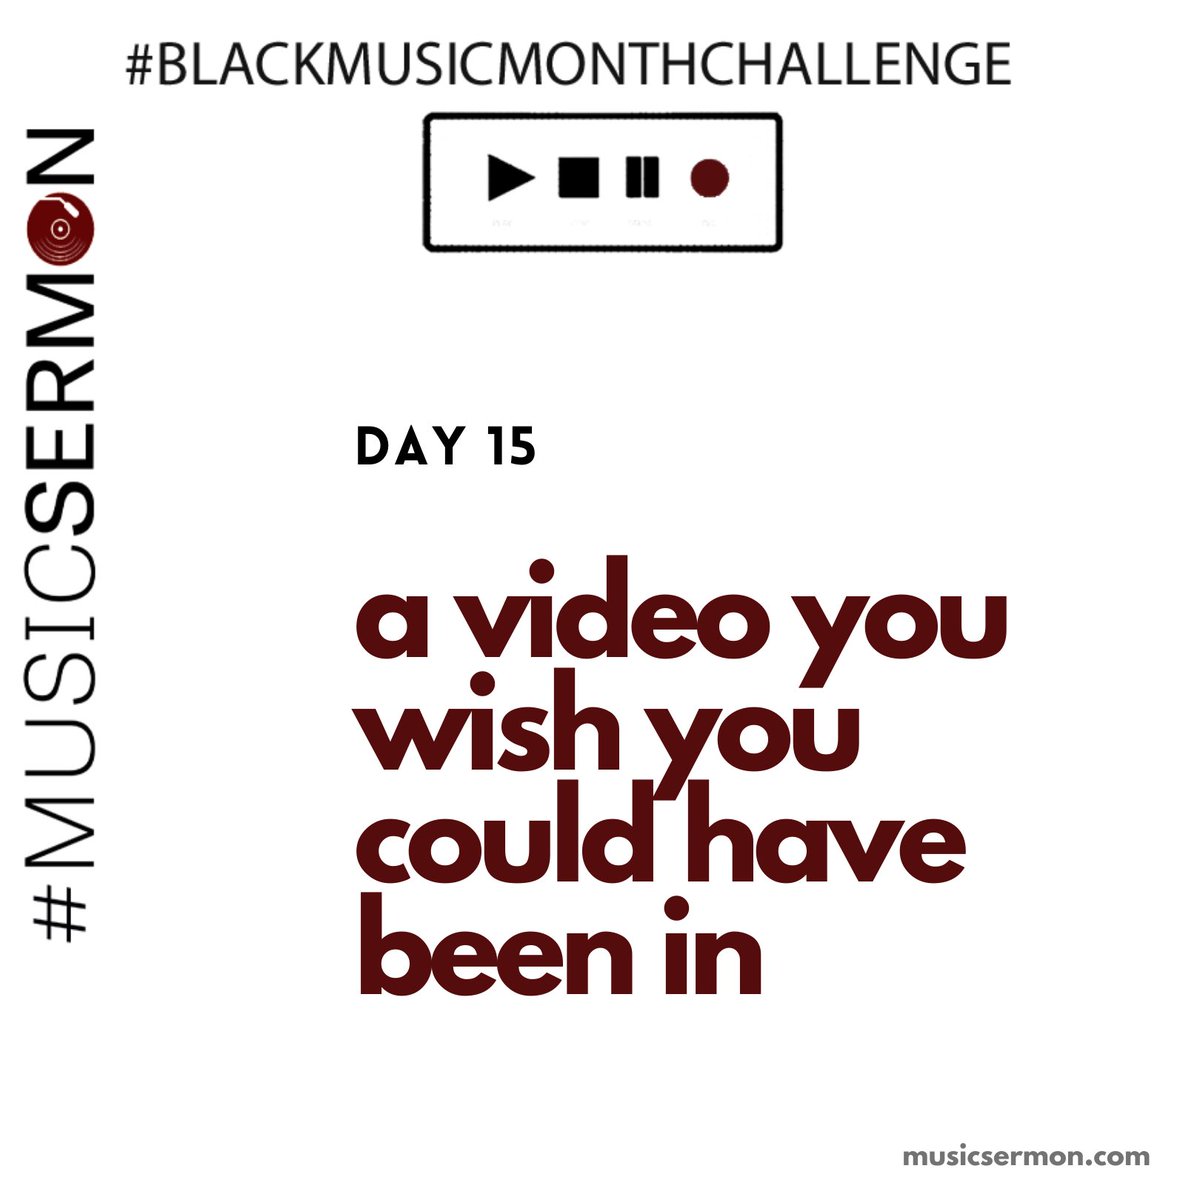 Day 15 of the  #BlackMusicMonthChallenge is a little different. Today’s not about the songs, but the *videos*. We all have joints we wish we could have been in. What’s yours?